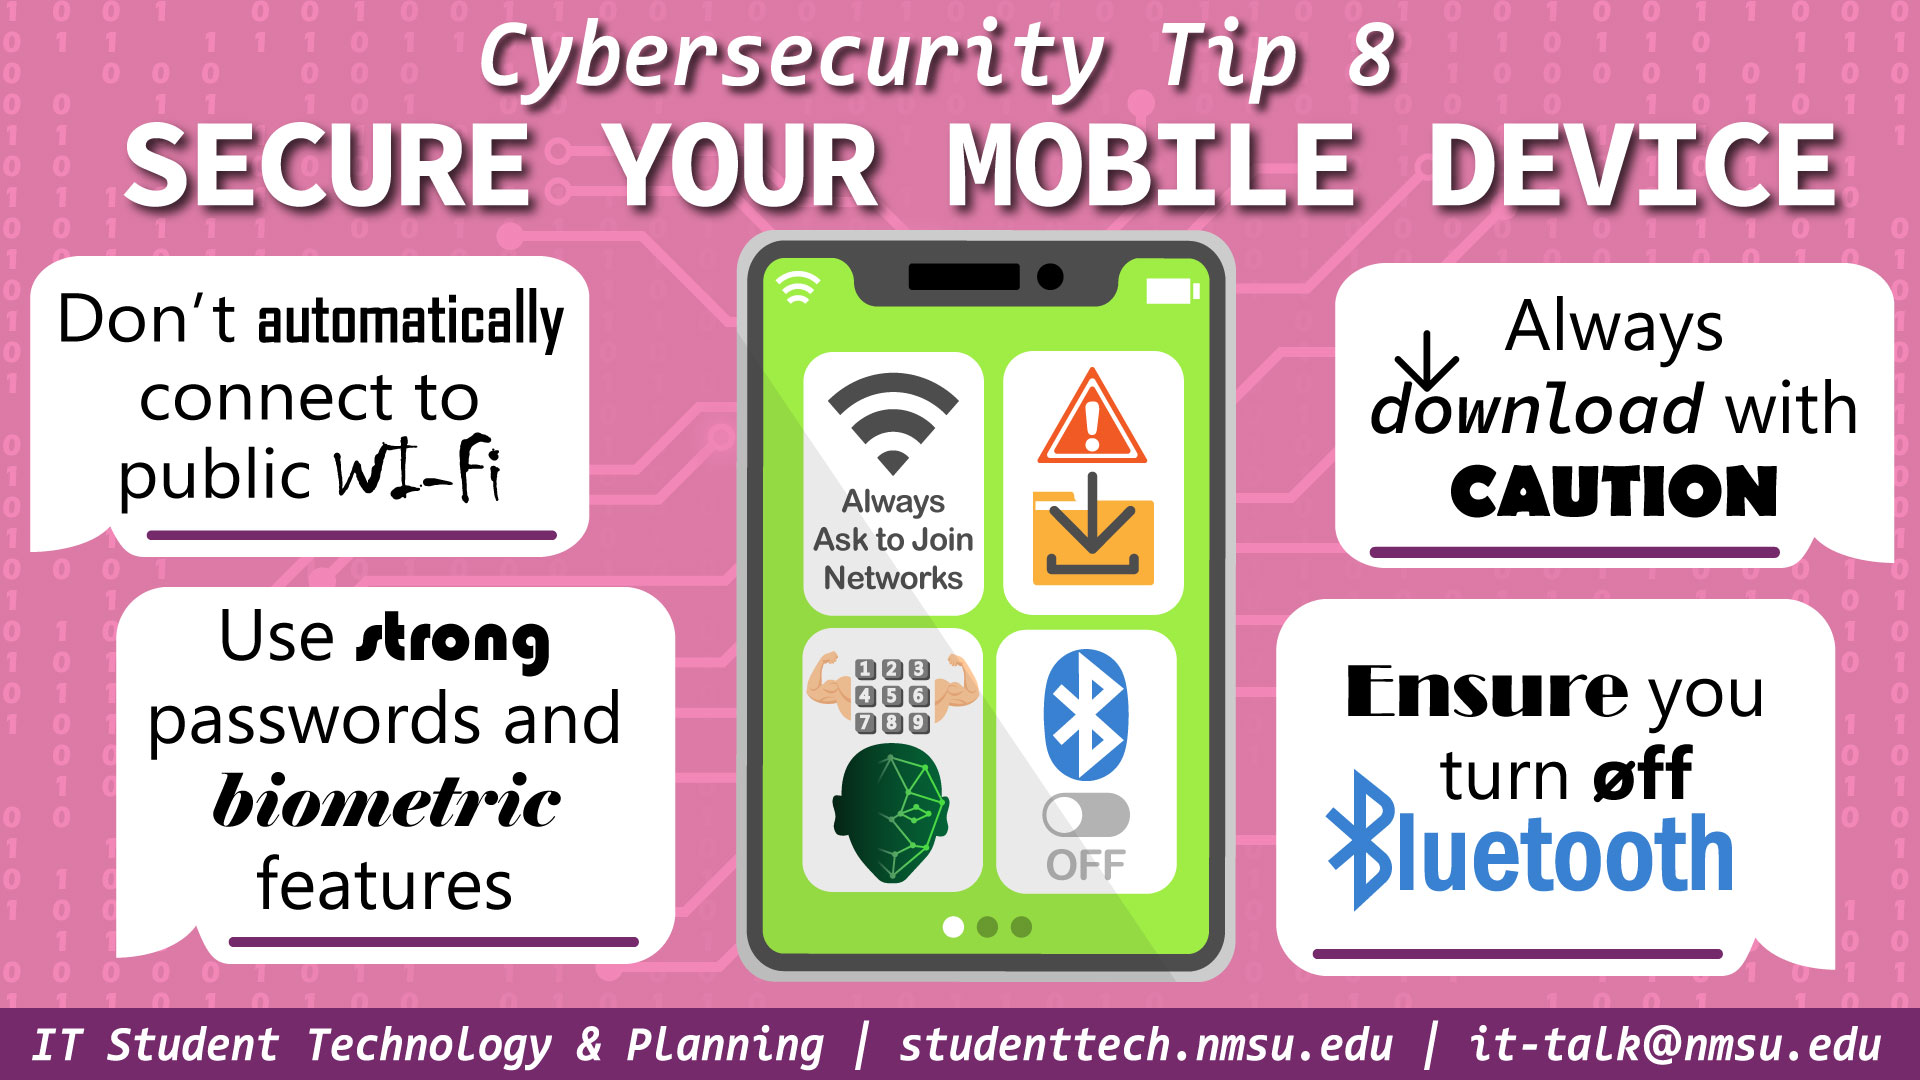 Cybersecurity Tip 8: Secure your mobile device. Do not automatically connect to public wi-fi. Use strong passwords and biometric features. Always download with caution. Ensure you turn off bluetooth.